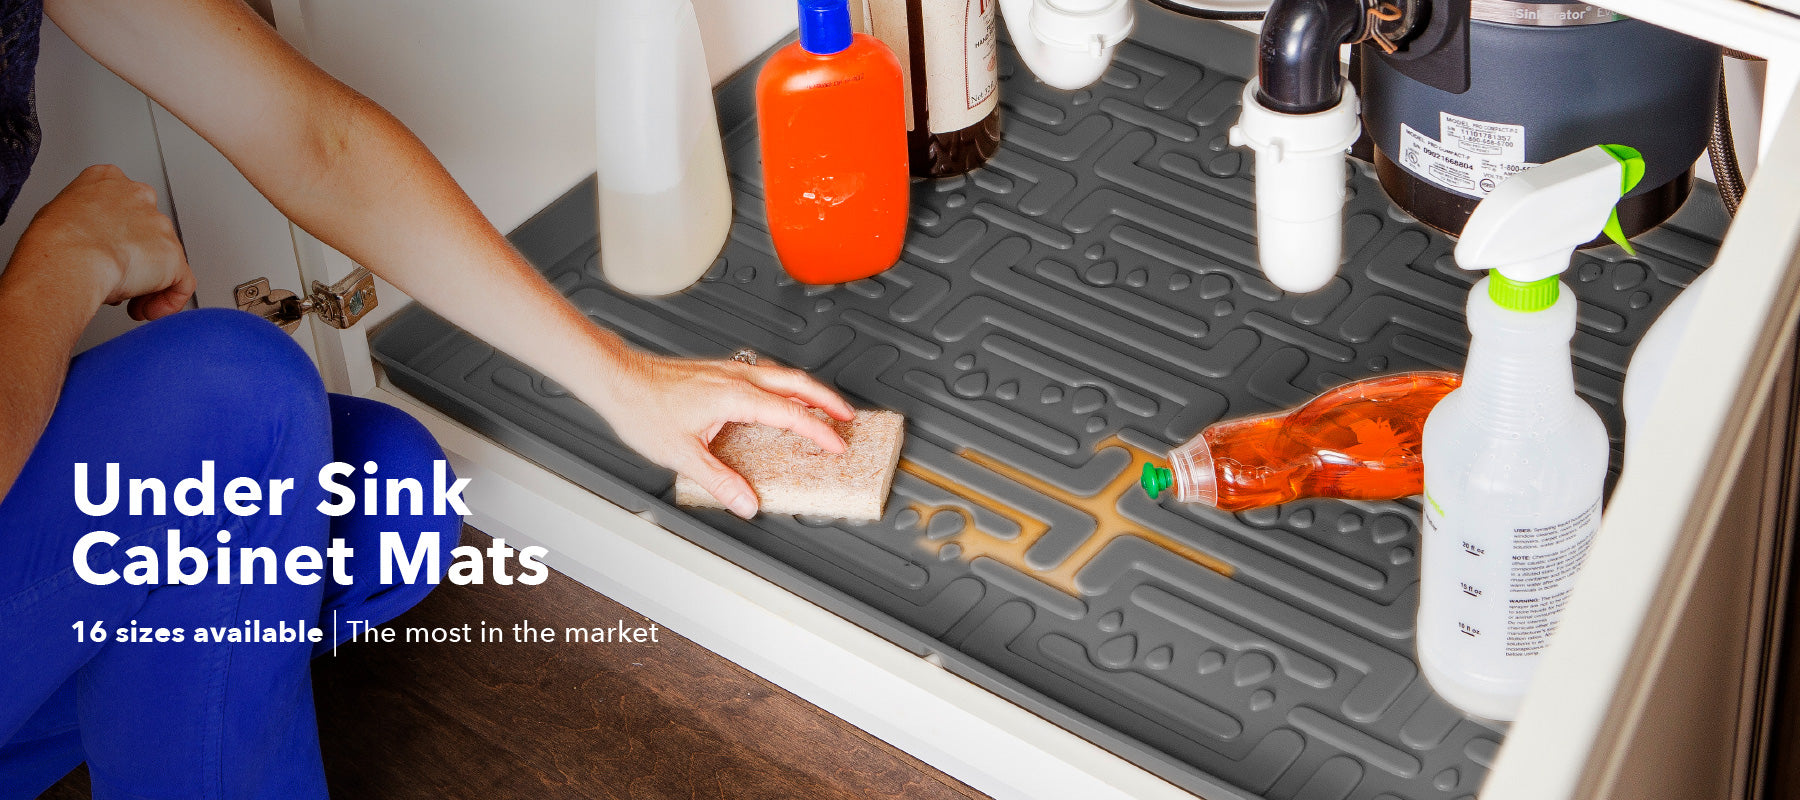 7 Cool Accessories for Under-Sink Areas in Your Home – Xtreme Mats